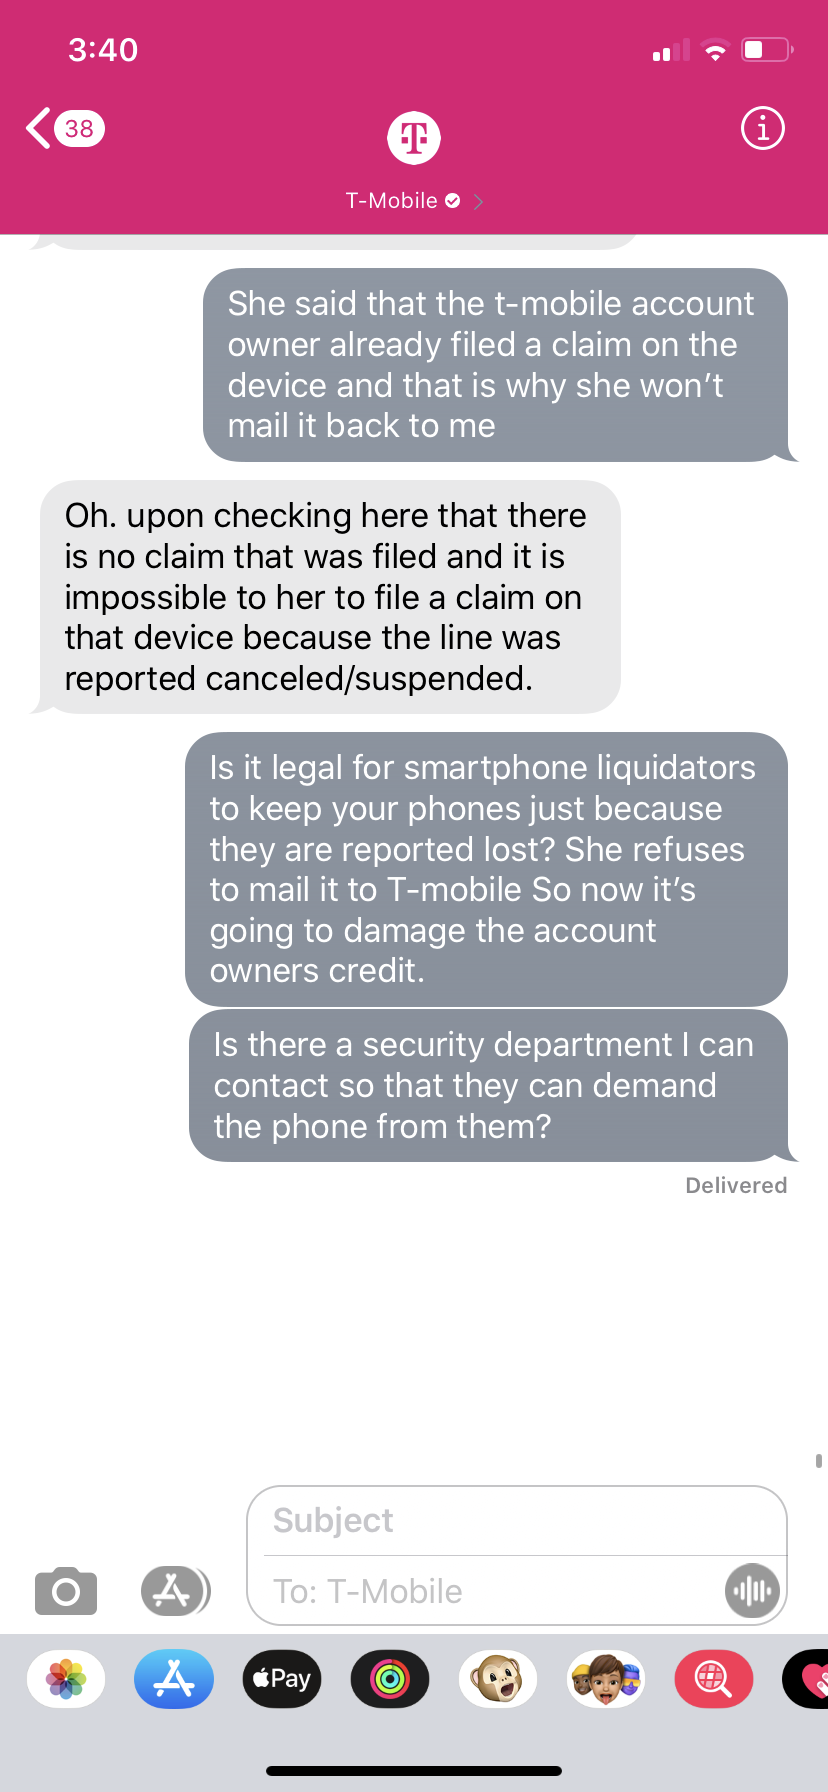 Phone is not stolen or claimed on insurance 